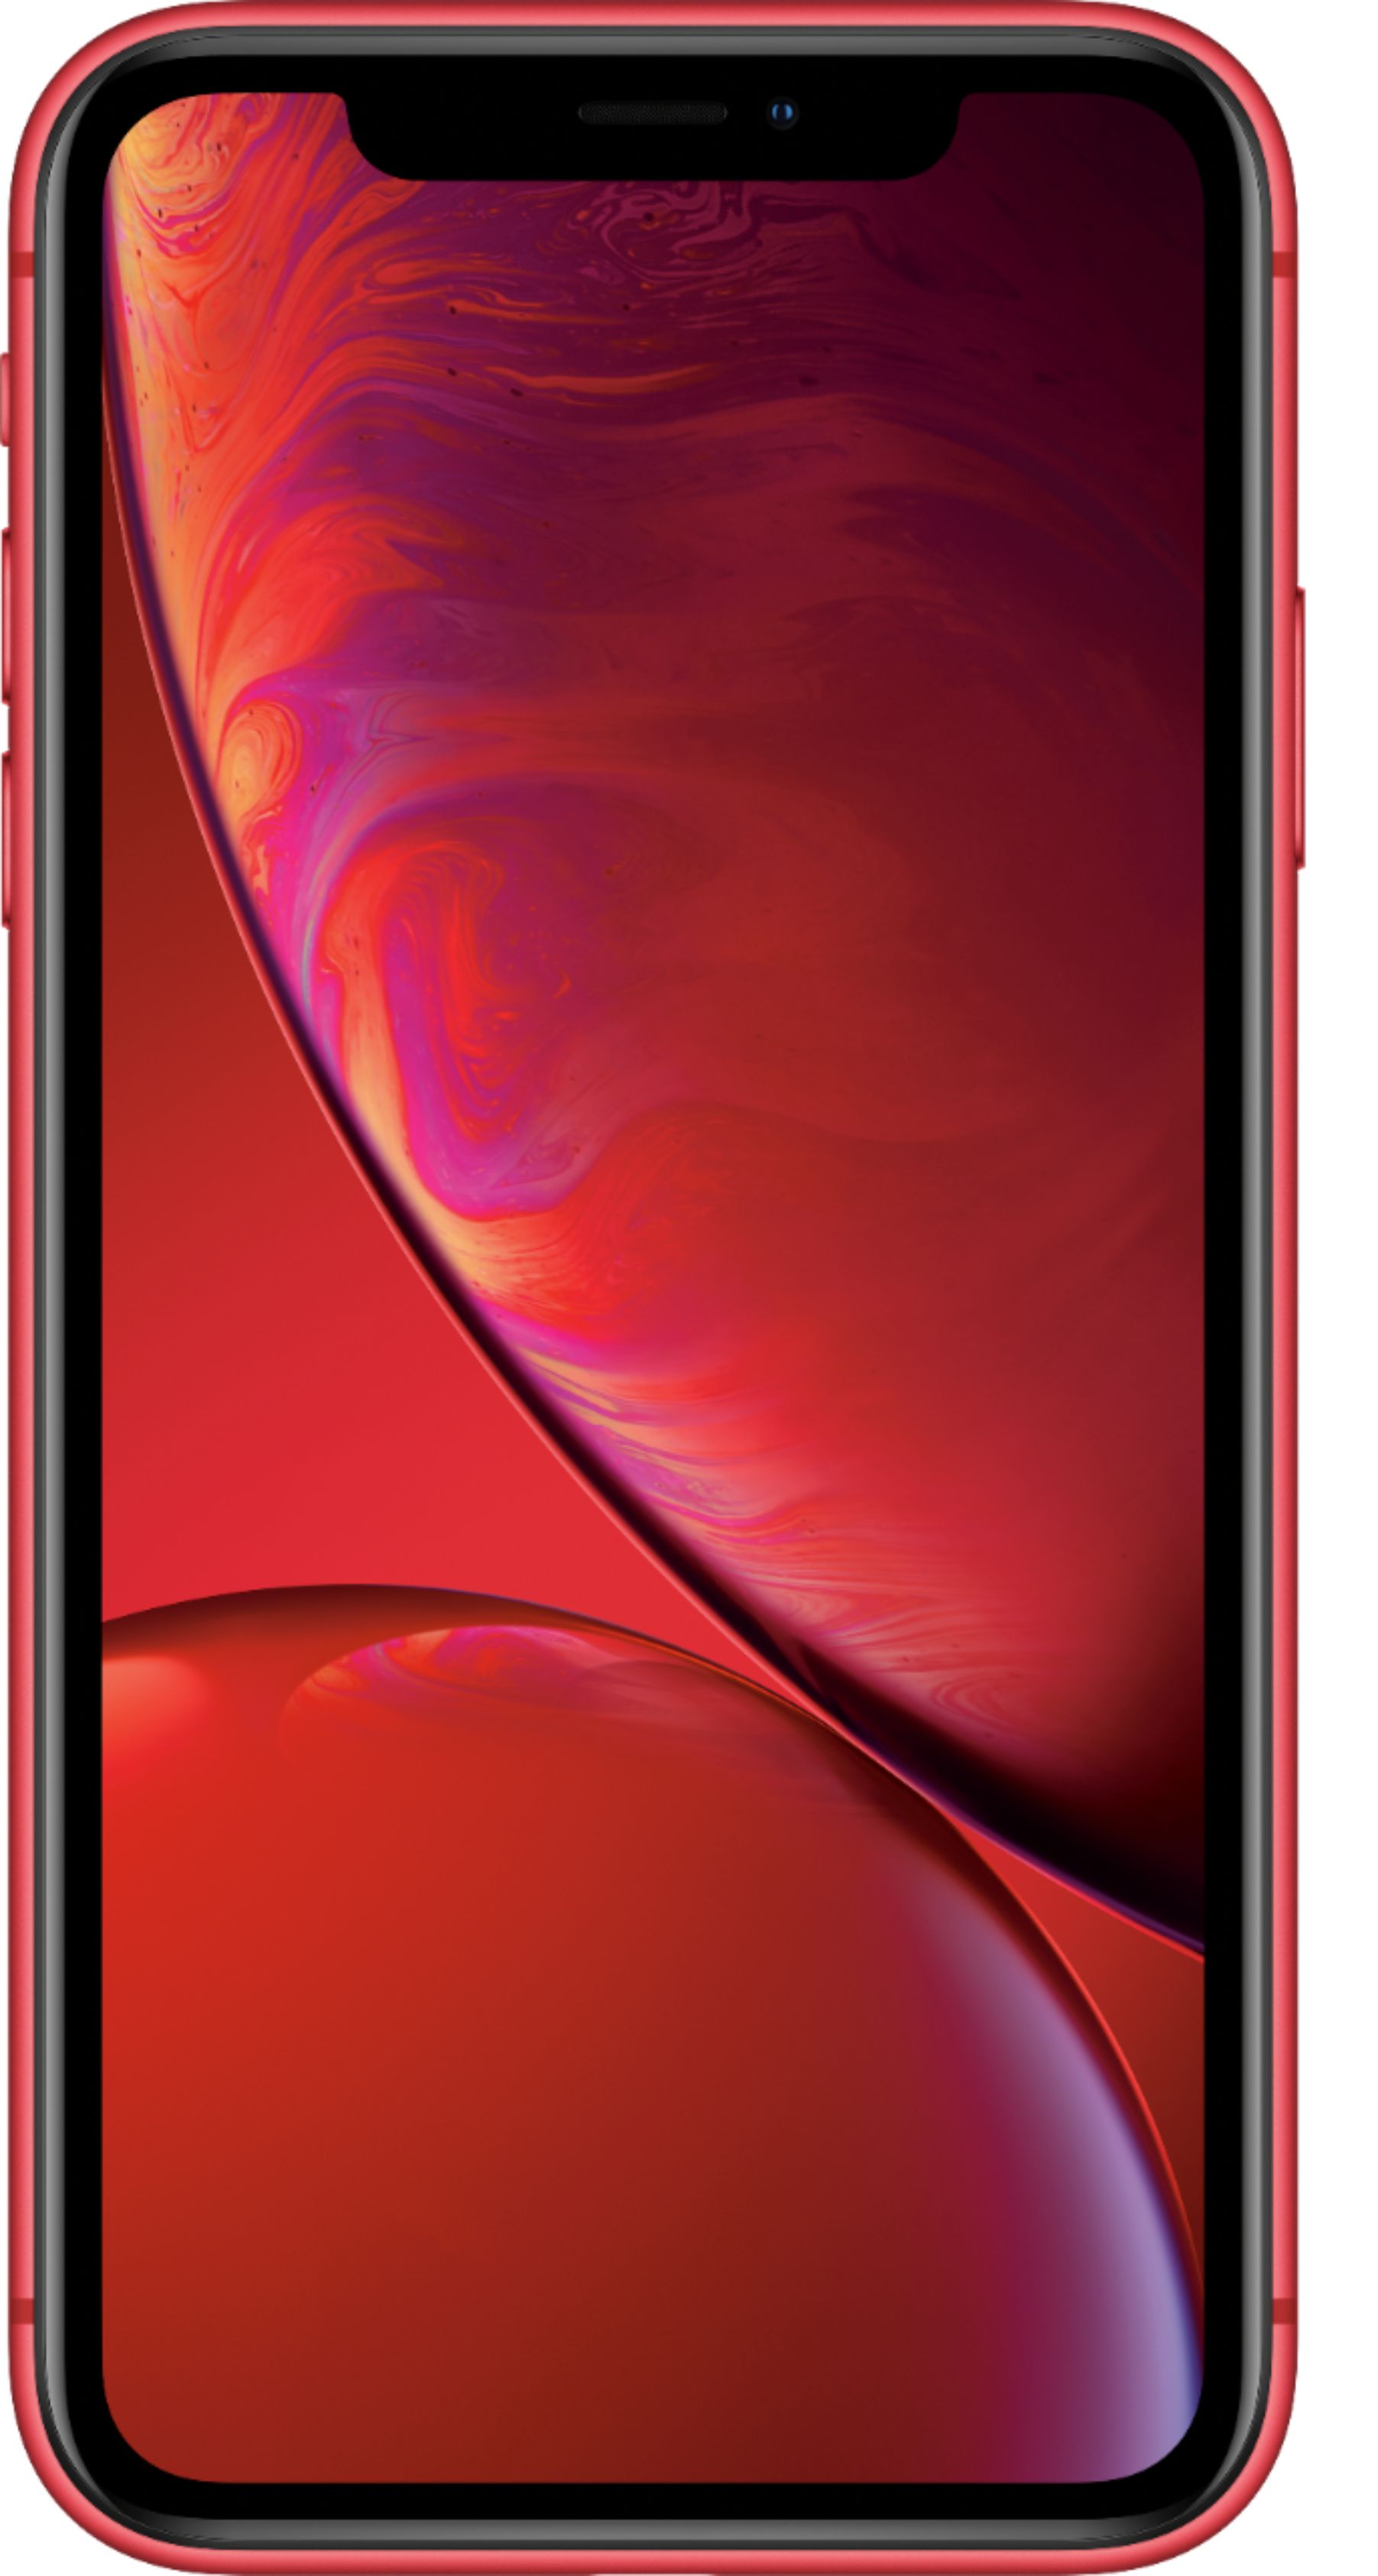 Apple Iphone Xr 64gb Product Red Sprint Mryu2ll A Best Buy